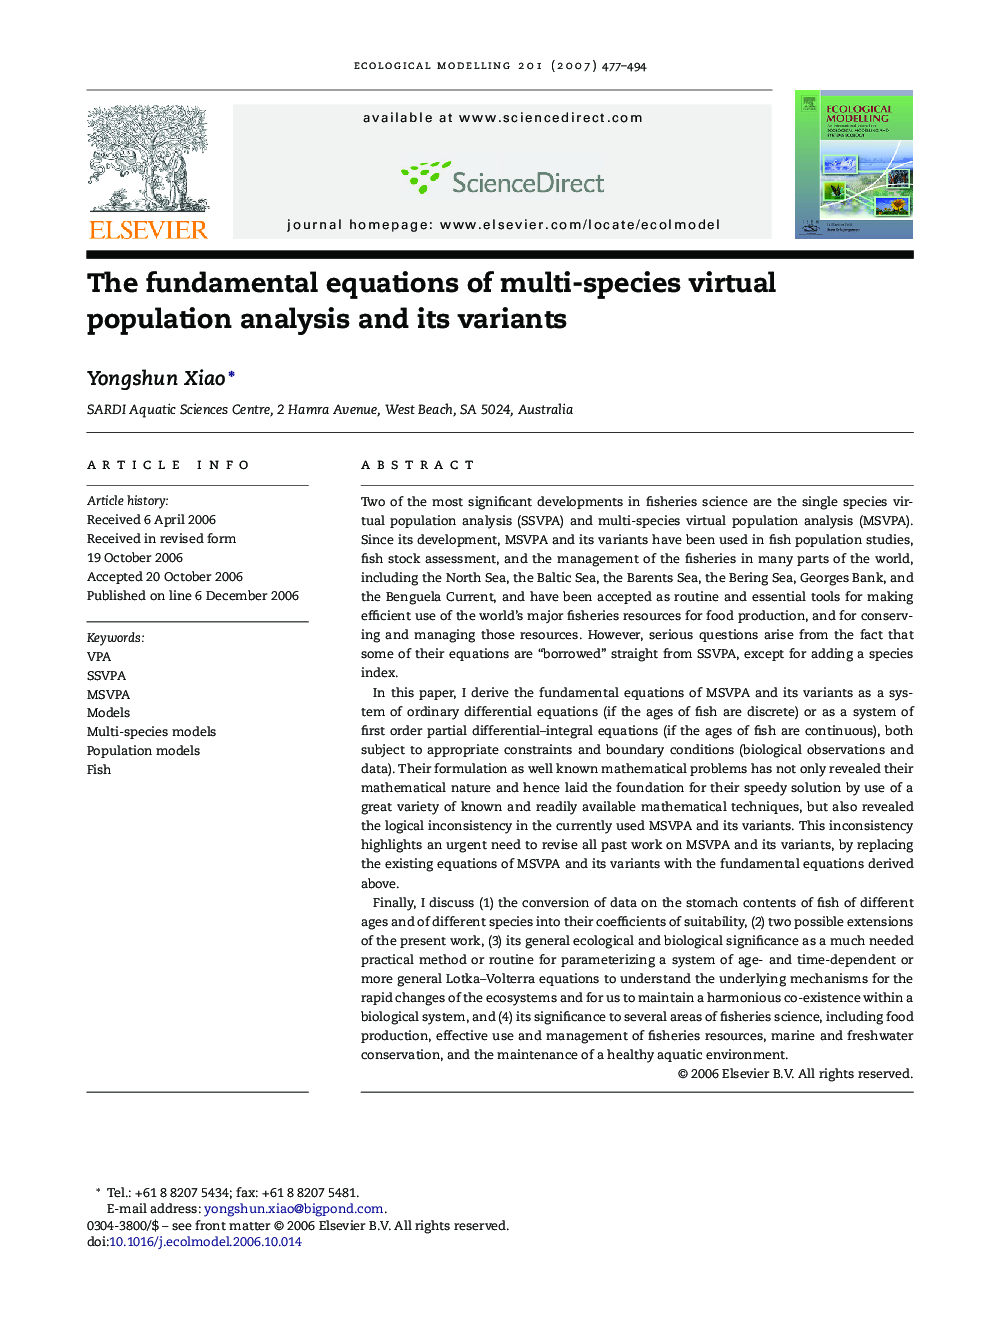 The fundamental equations of multi-species virtual population analysis and its variants